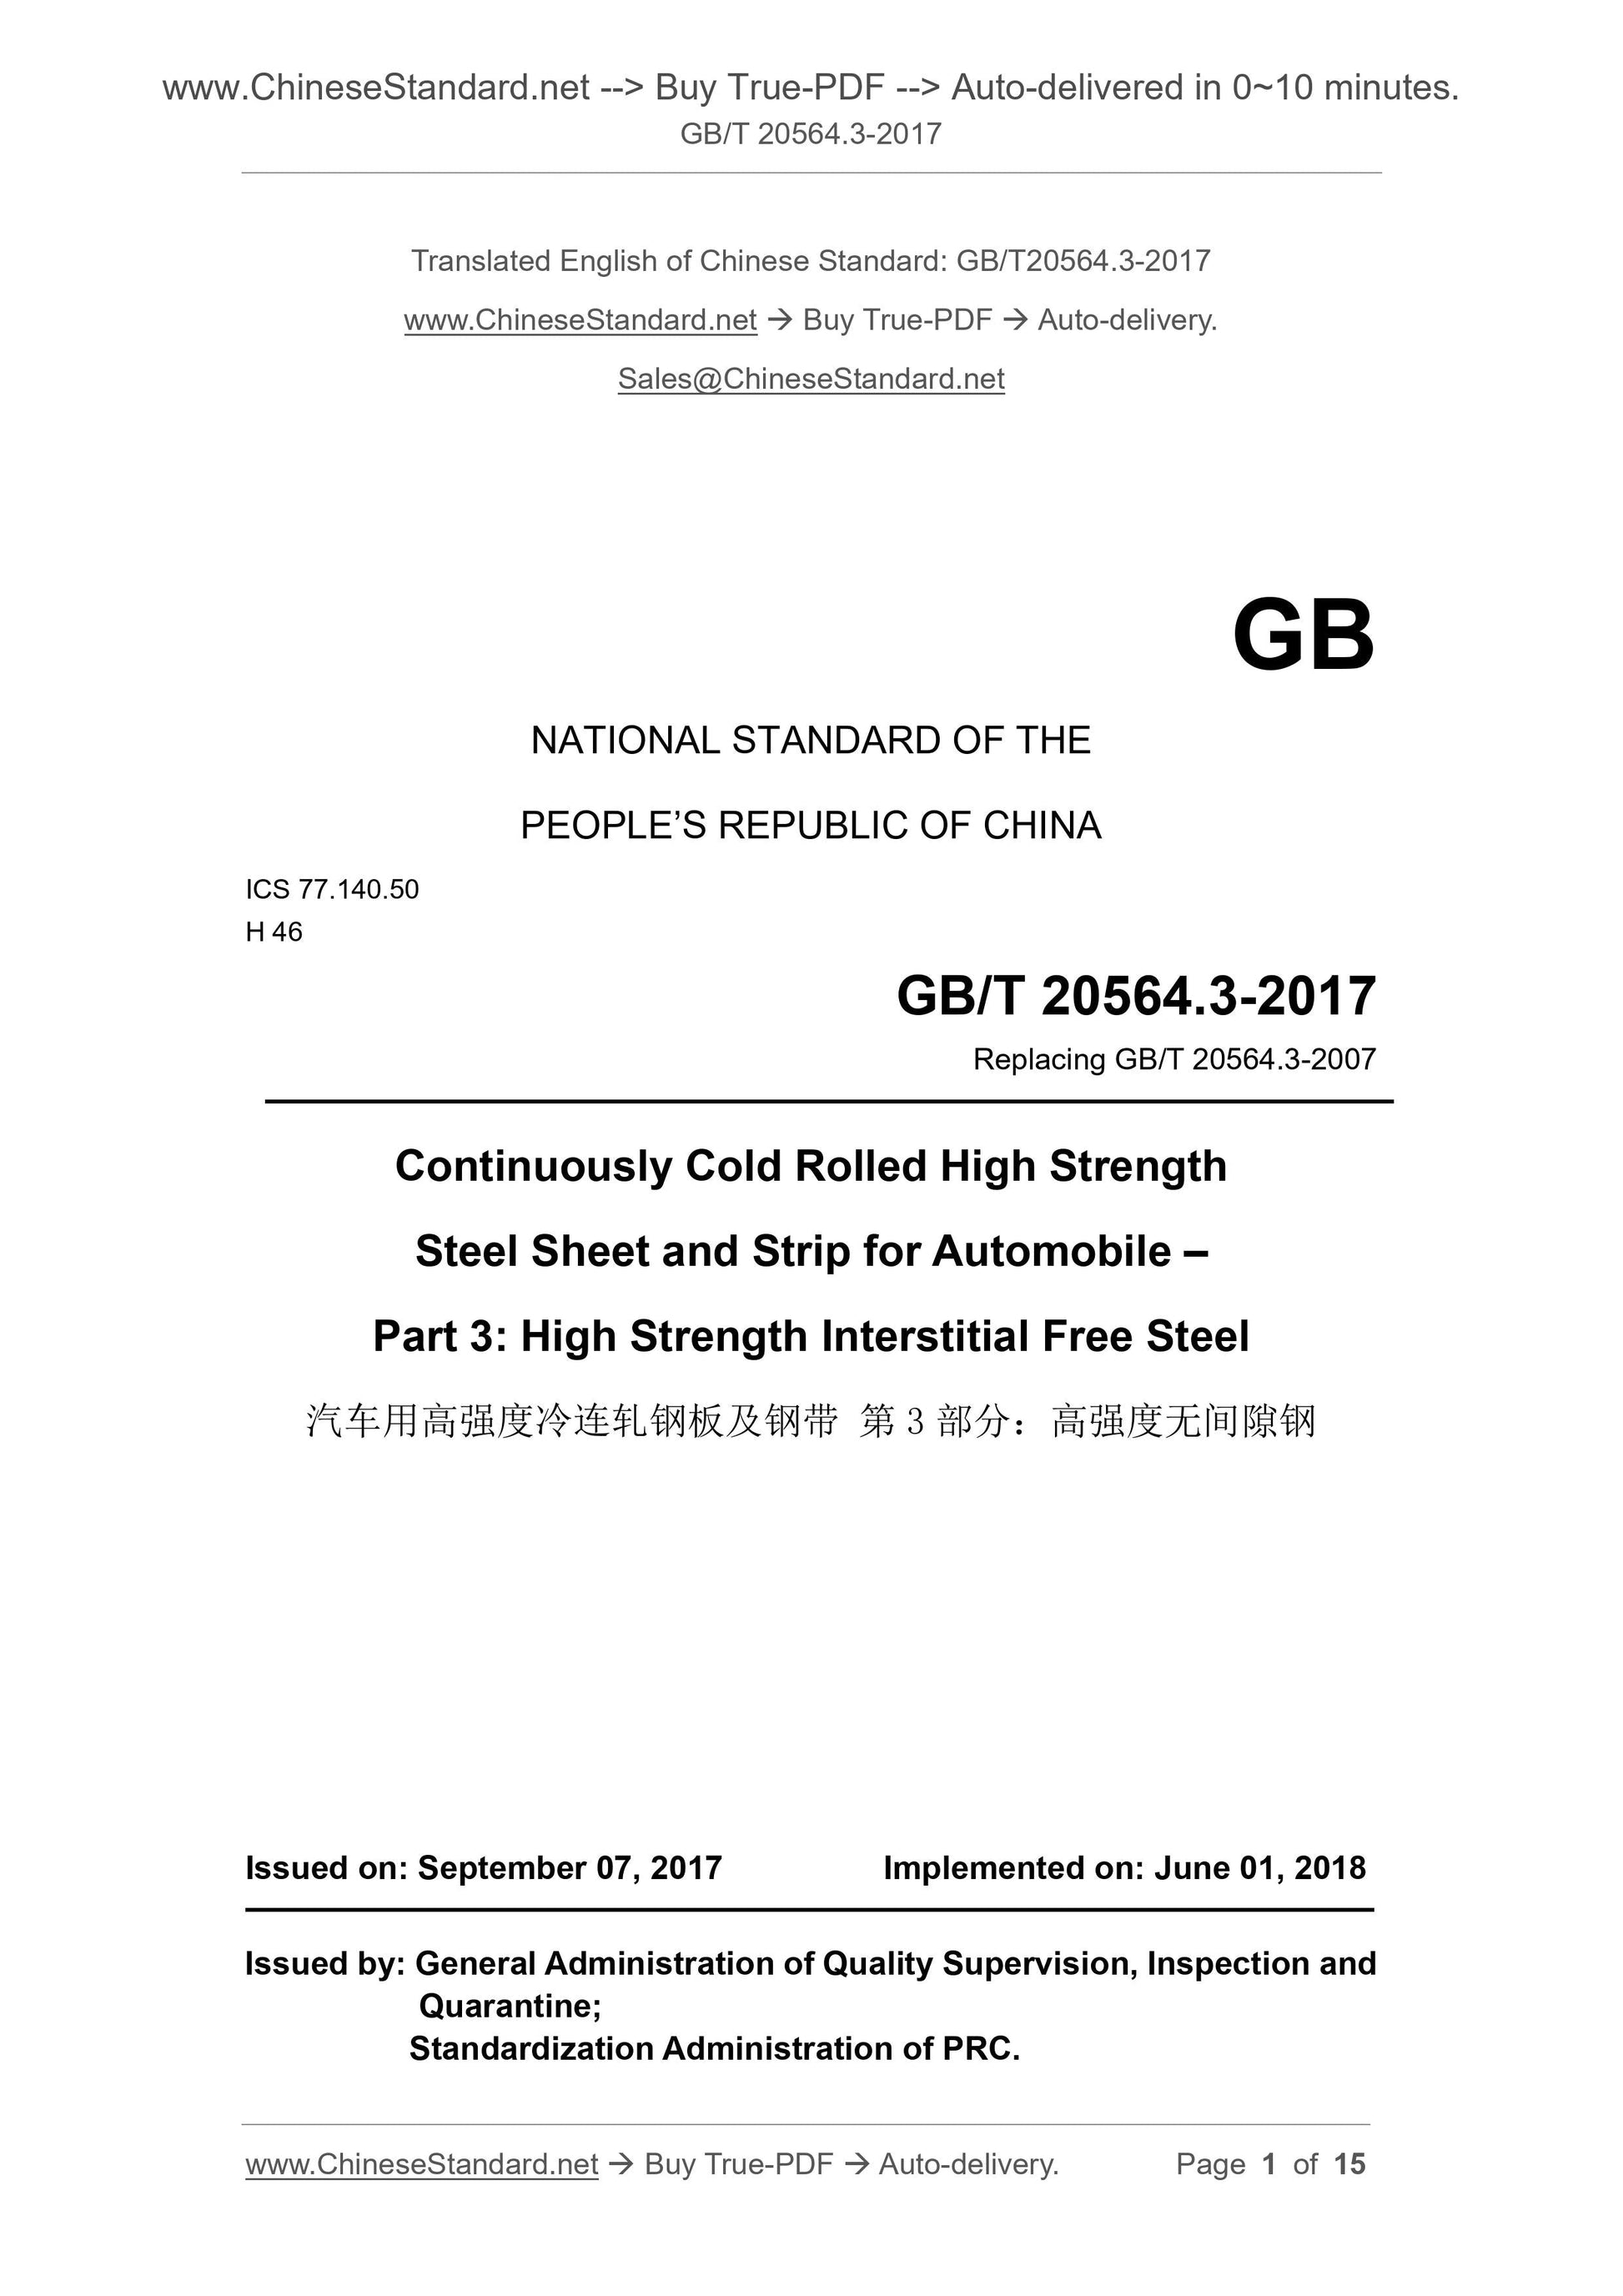 GB/T 20564.3-2017 Page 1